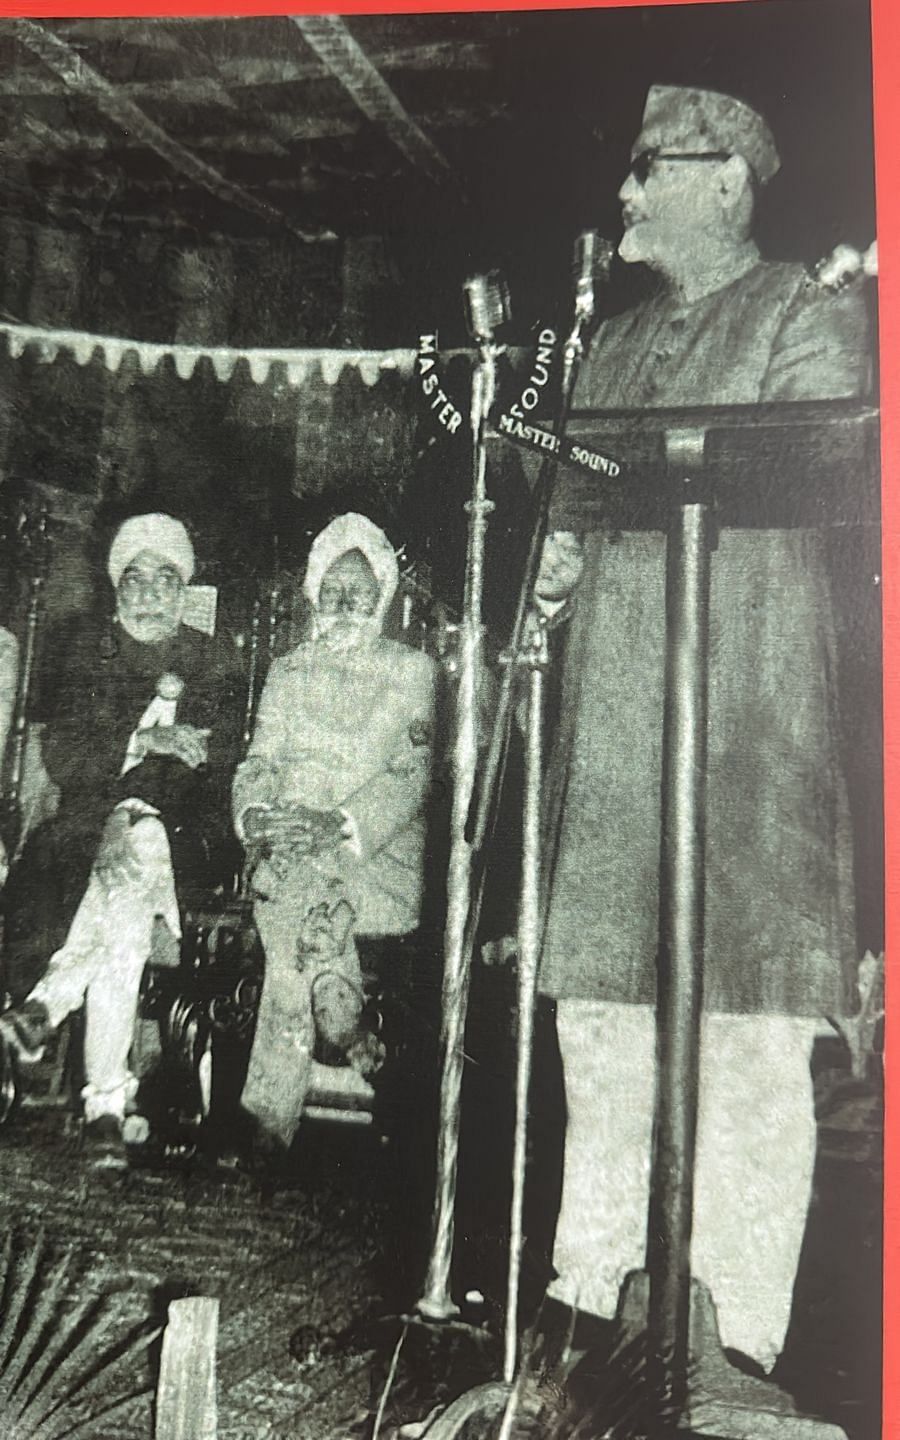 Zakir Husain speaking at a public function, the sound was managed by Master Sound | By special arrangement 